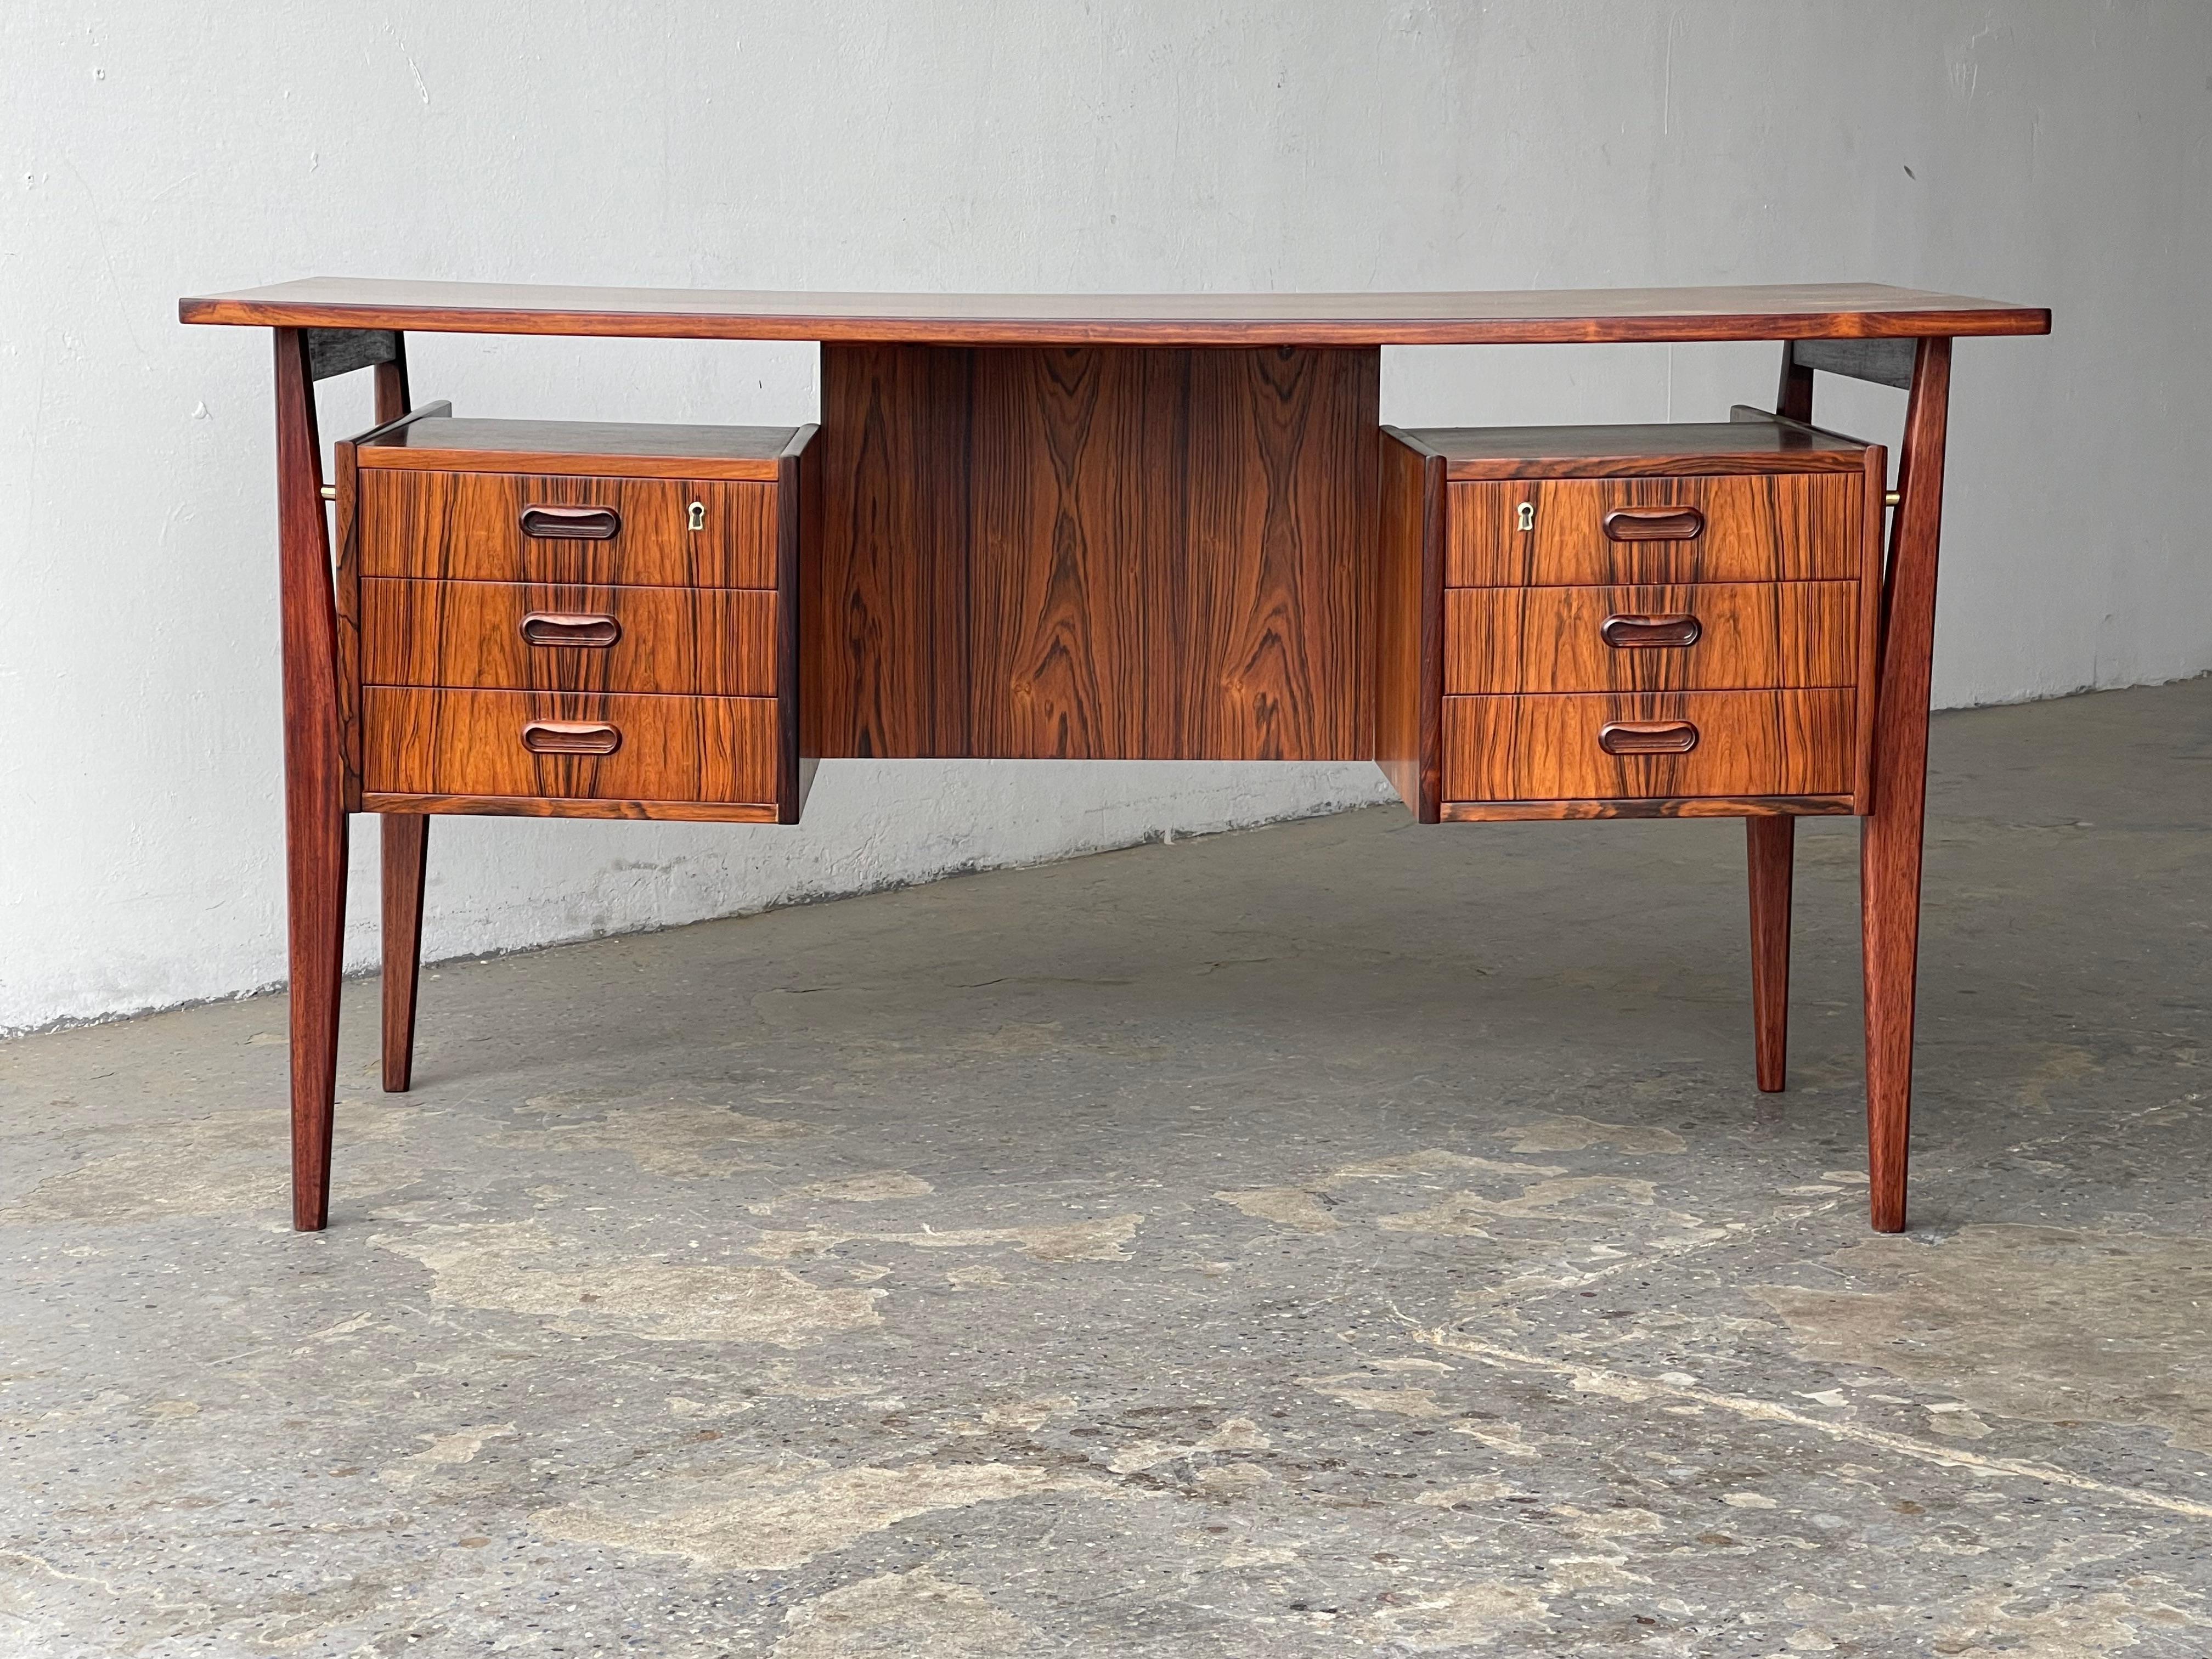 Designed by Gunnar Nielsen for Tibergaard in 1960's Denmark, this exquisite writing desk would make a stylish addition to any home or office environment.

This writing desk boasts Nielsen's flair for style, form and functionality with no detail